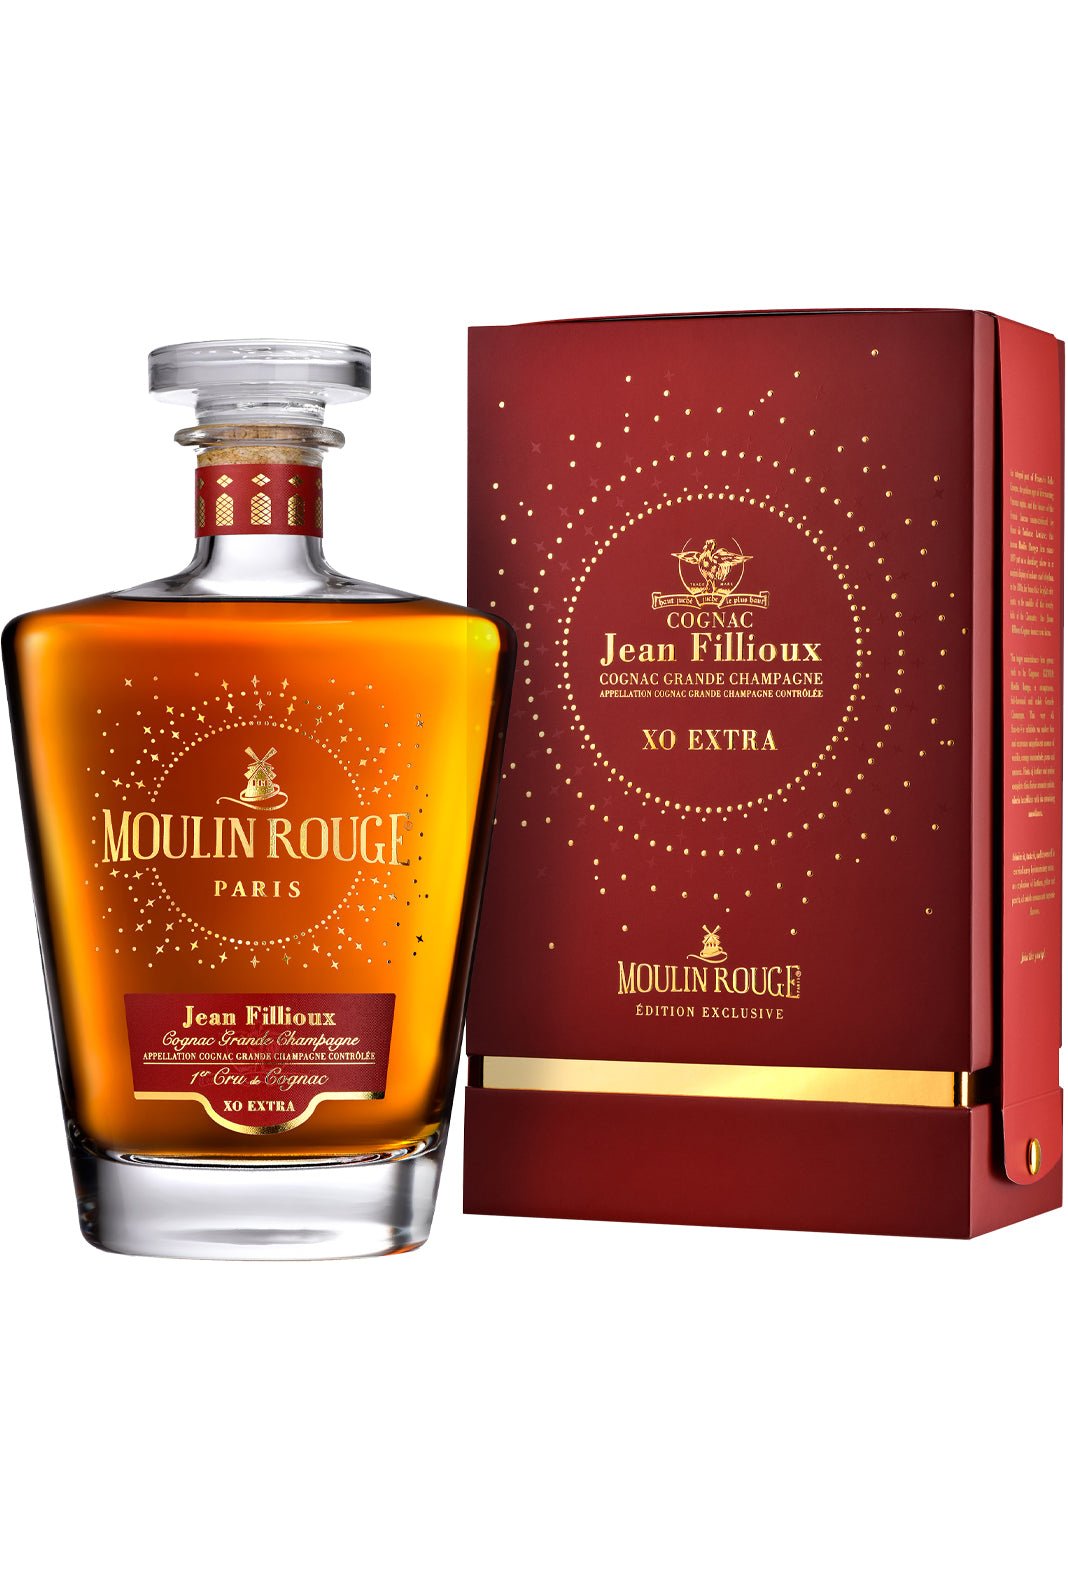 Jean Fillioux Moulin Rouge 30 Years Grand Champagne Cognac 40% 700ml | Cognac | Shop online at Spirits of France